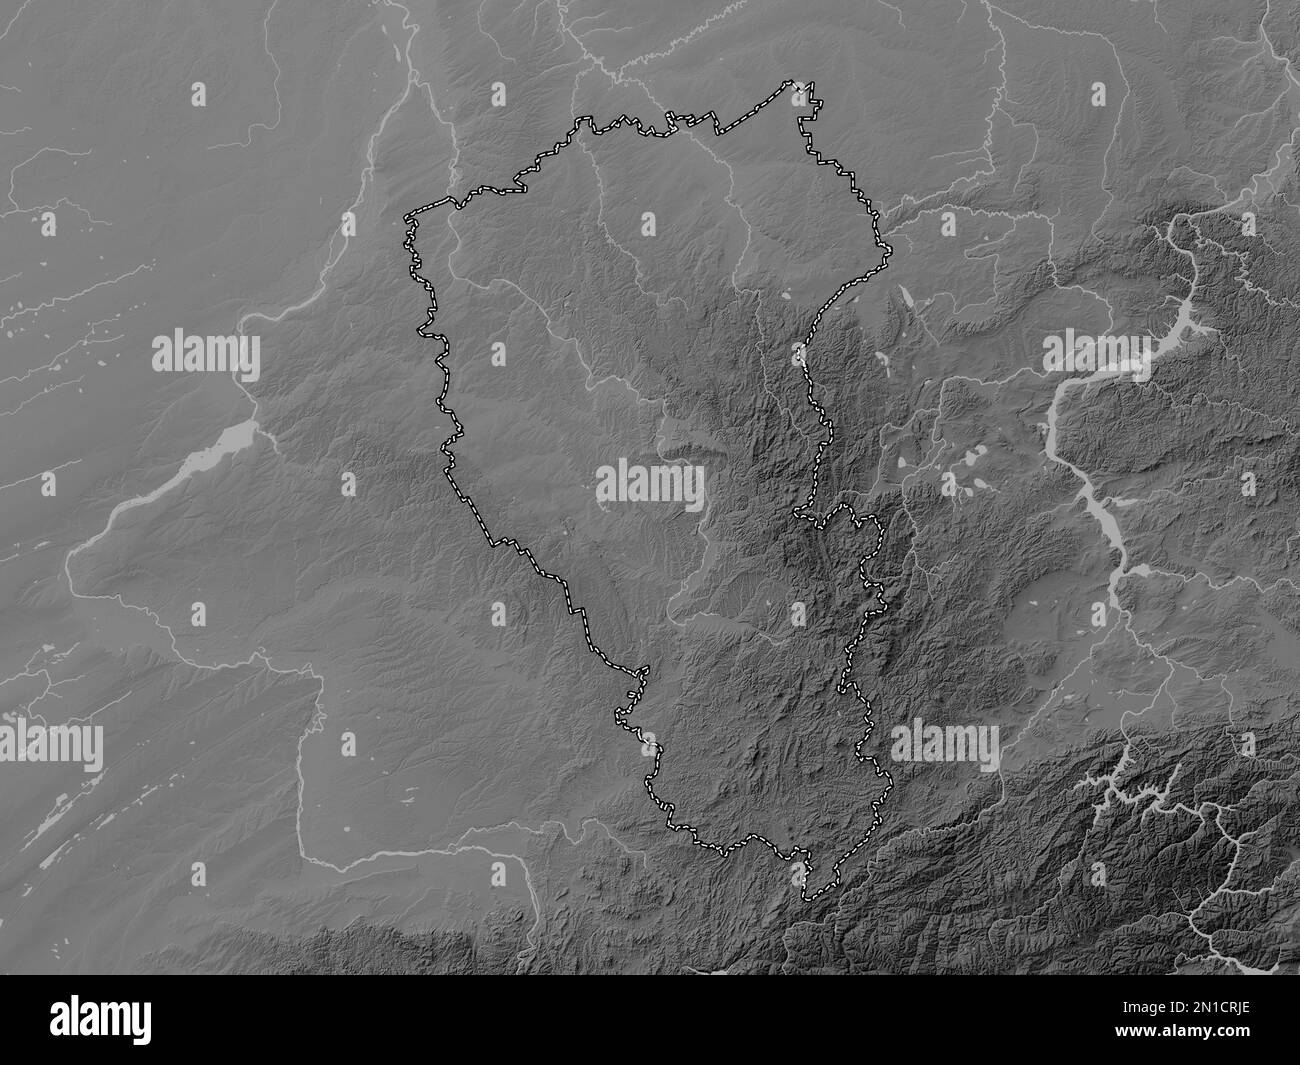 Kemerovo, region of Russia. Grayscale elevation map with lakes and rivers Stock Photo